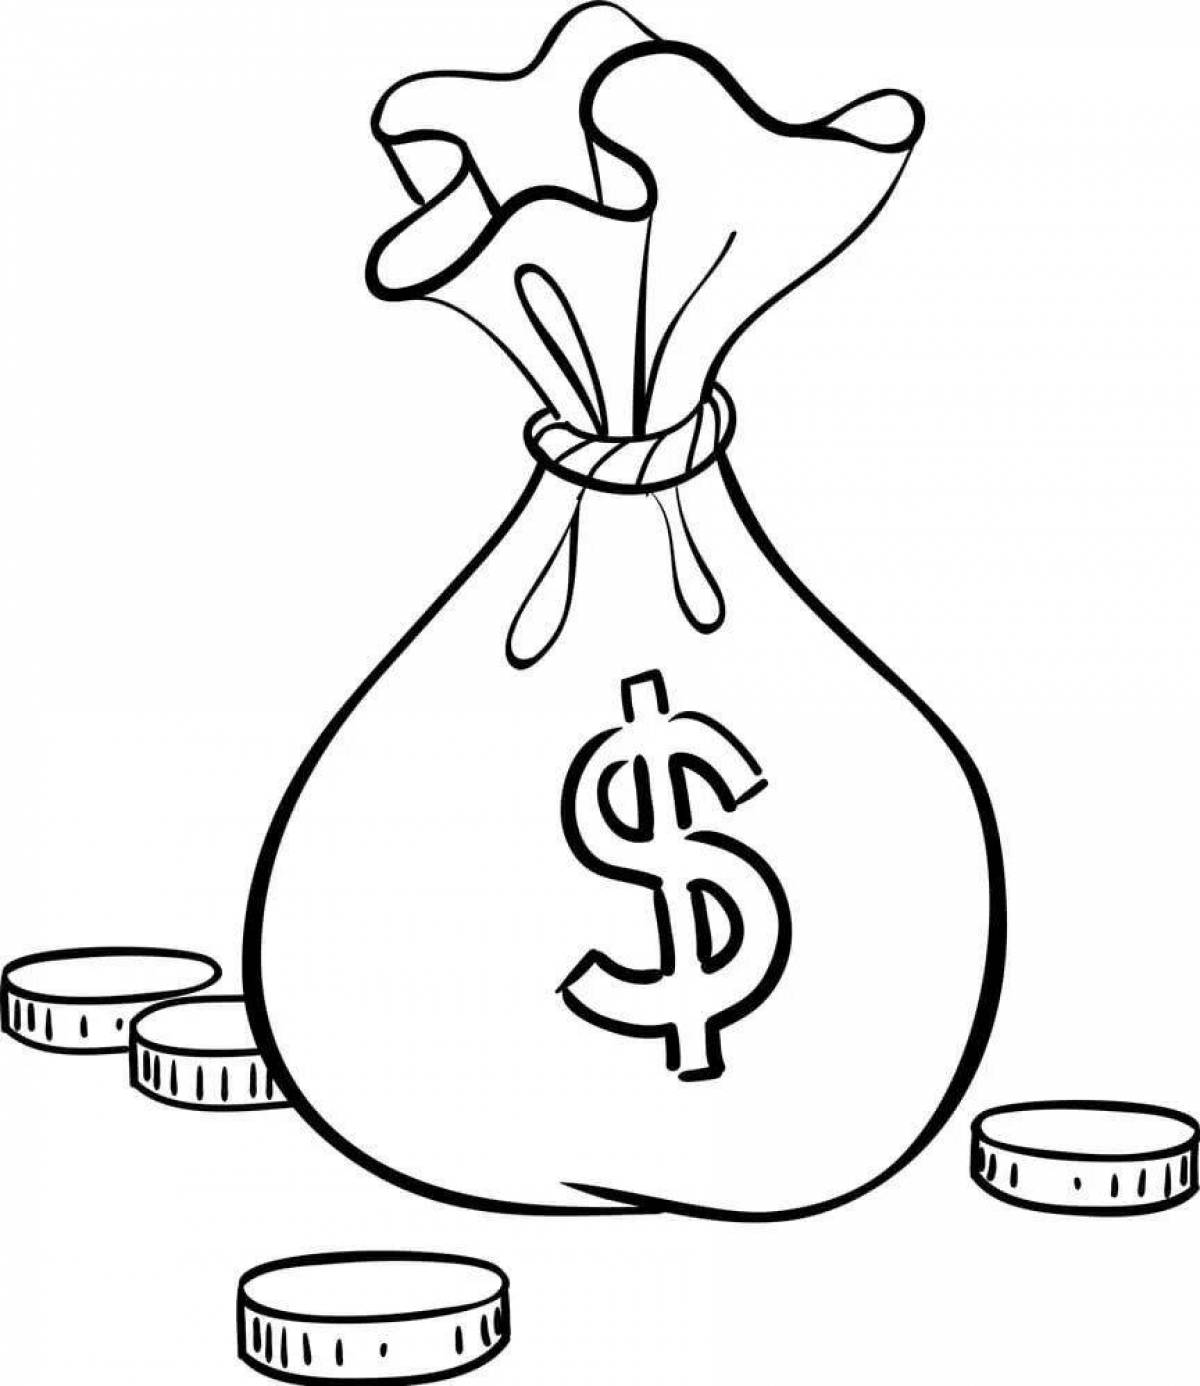 Colorful money bag coloring page